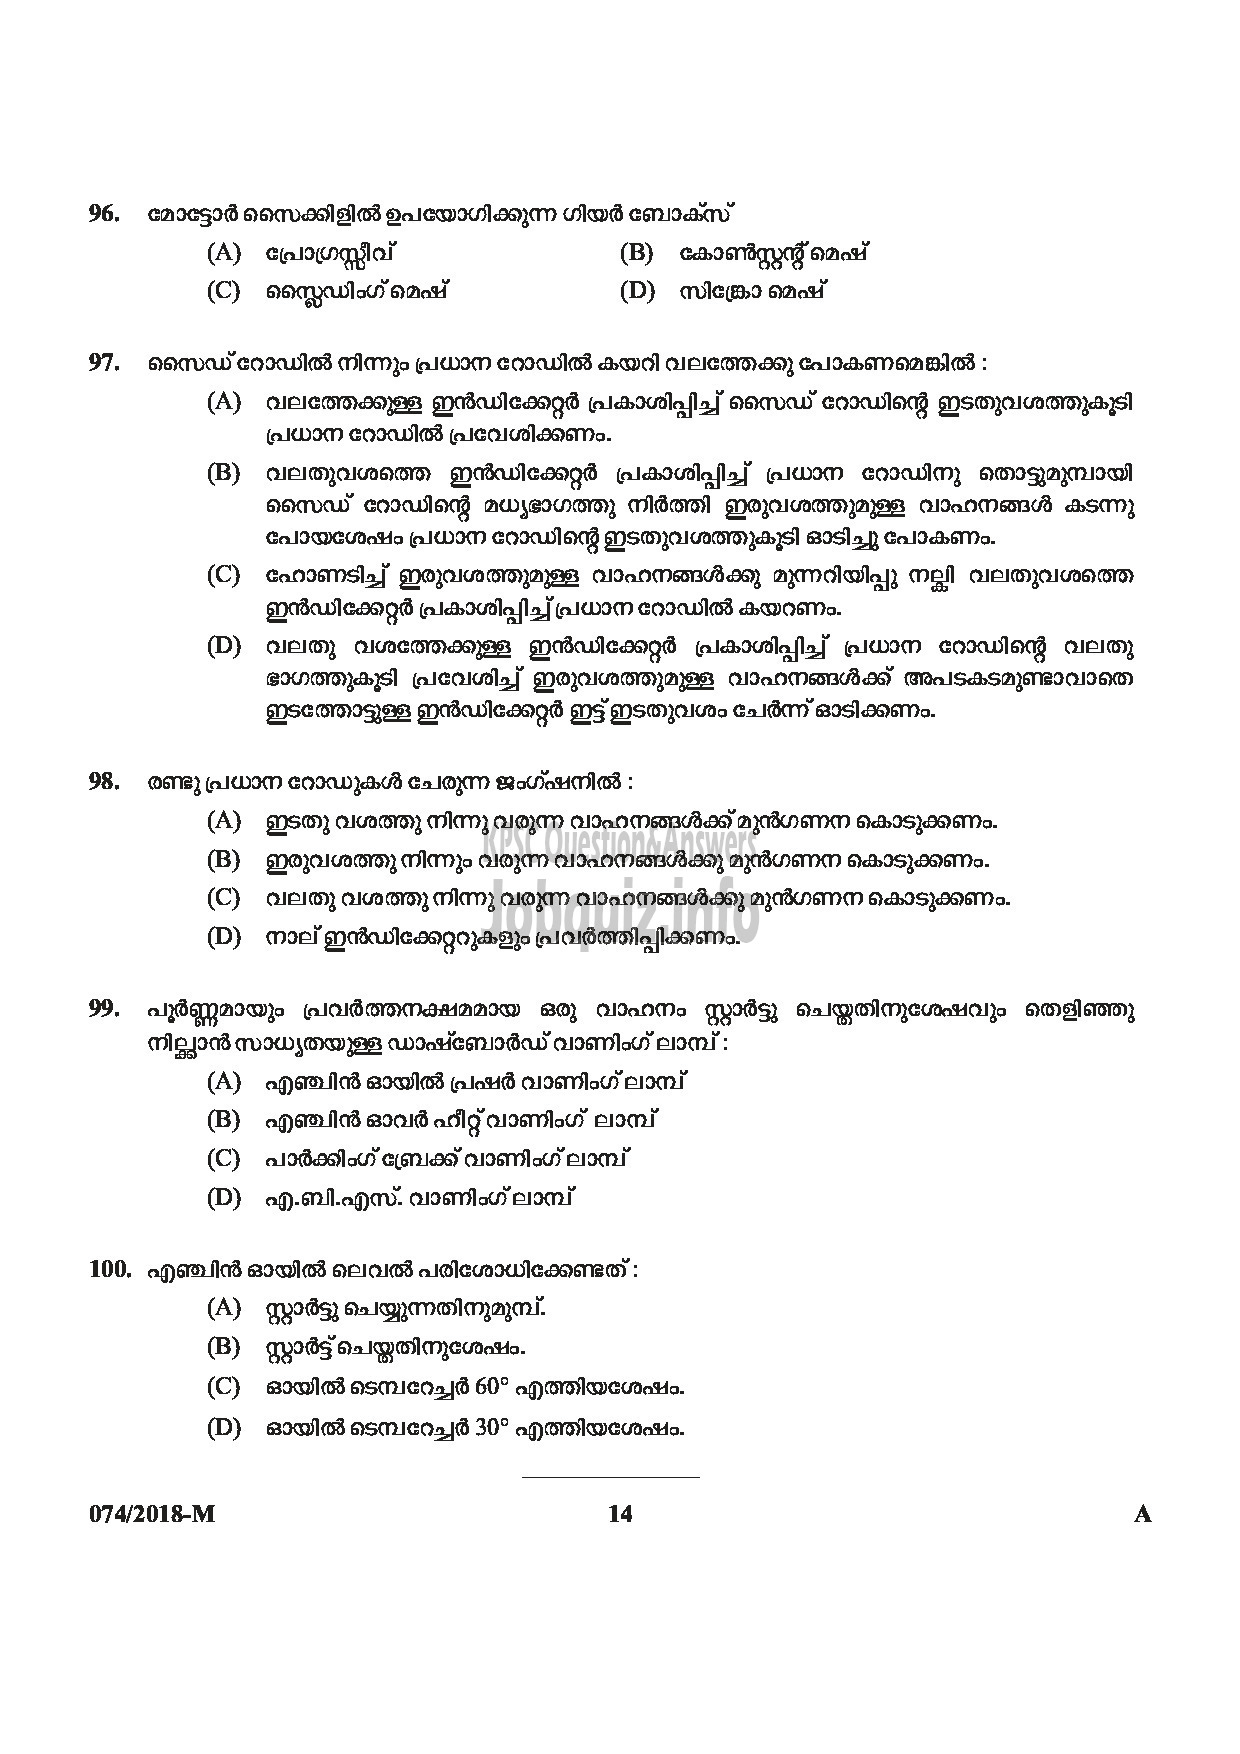 Kerala PSC Question Paper - POLICE CONSTABLE DRIVER ARMED POLICE BATTALION POLICE-14